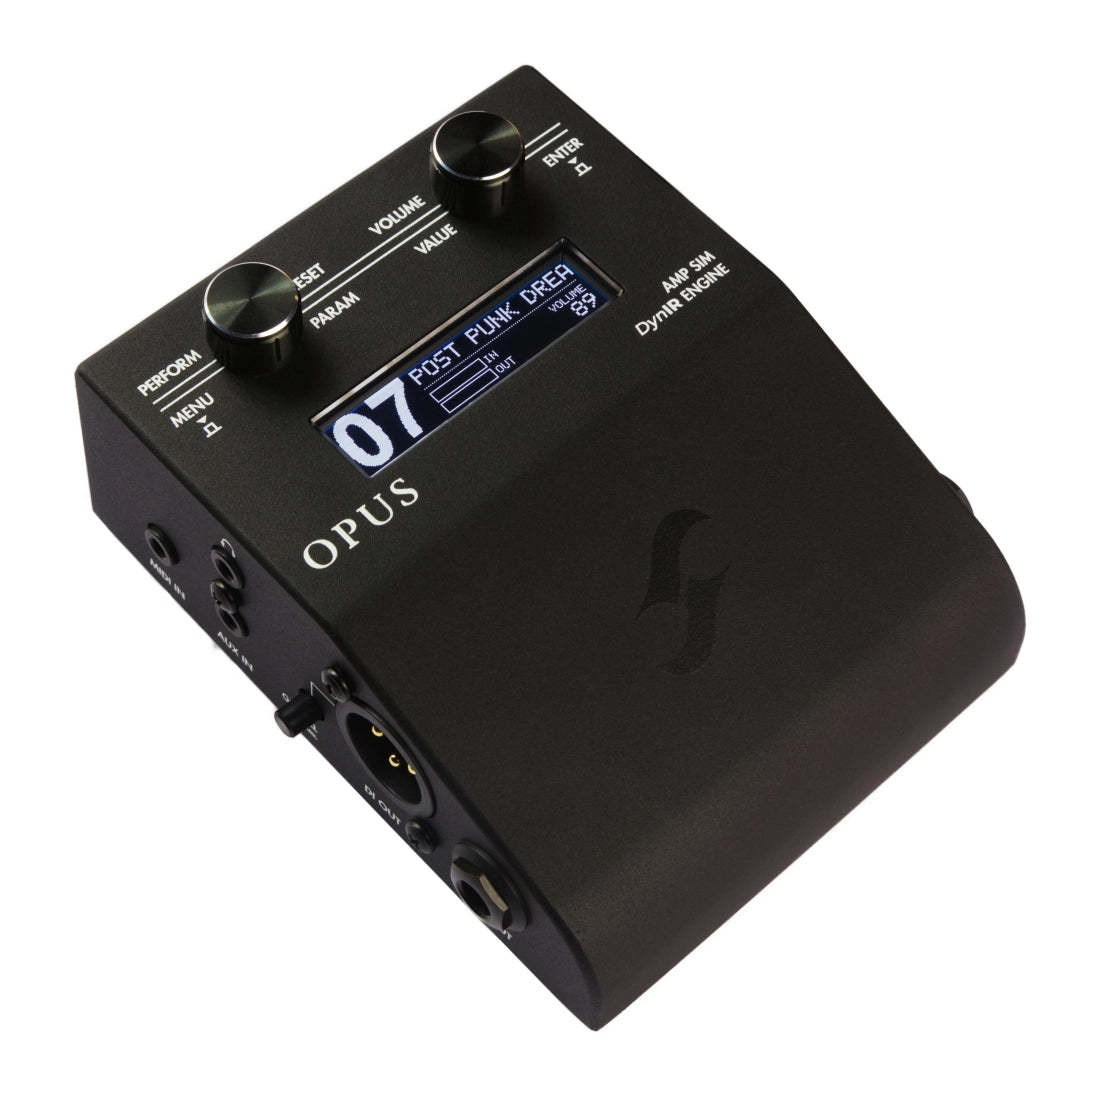 Two Notes OPUS Multi-Channel Amp Simulator and DynIR Engine